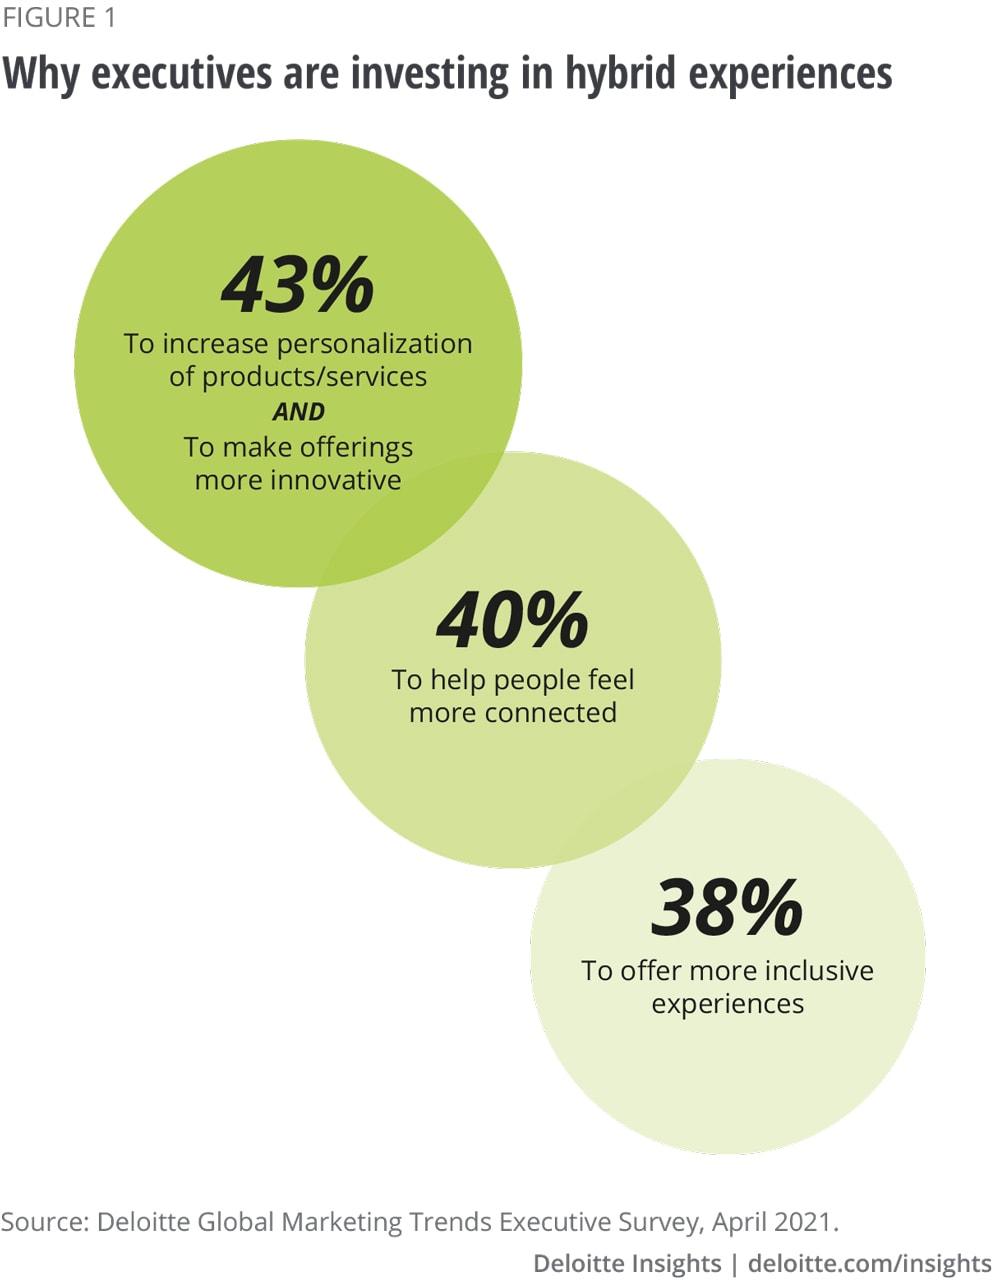 A chart showing why executives invest in hybrid experiences